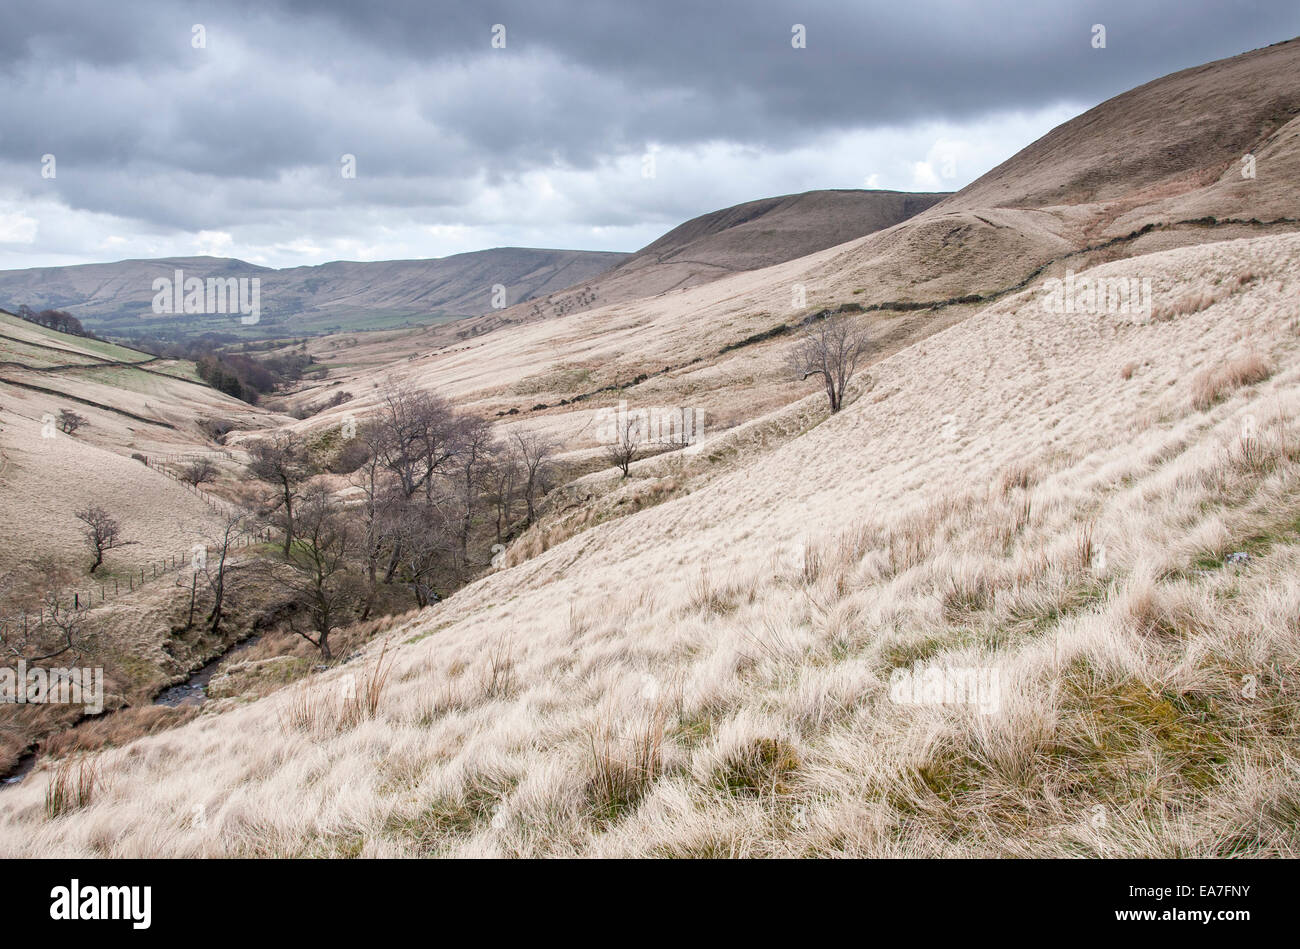 Moorland landscape in the Edale valley near Barber Booth in the Peak District, Derbyshire. Stock Photo